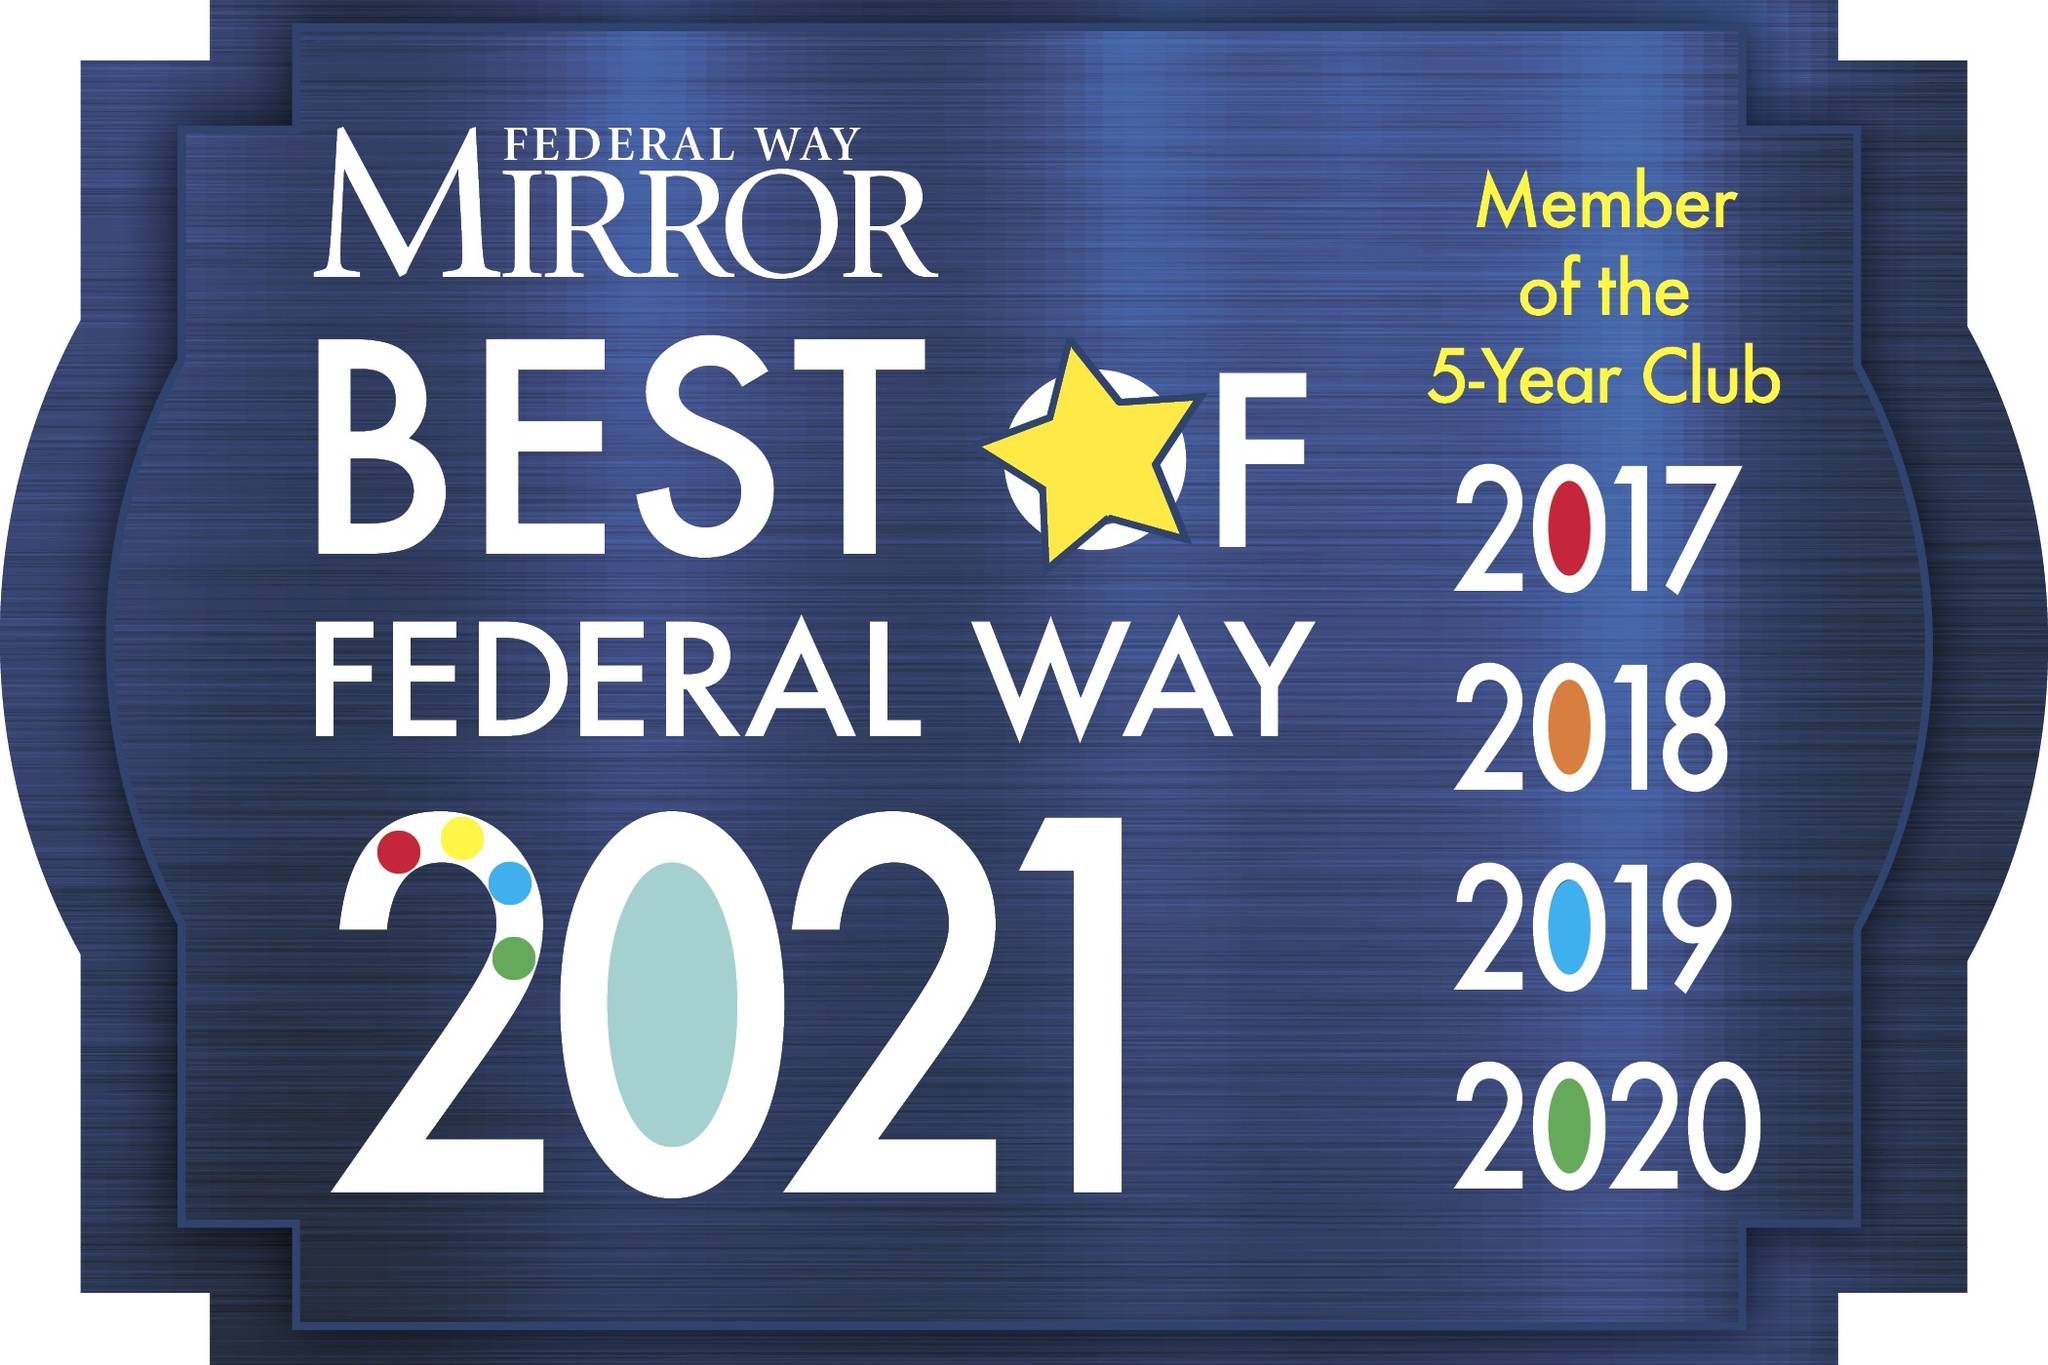 Five years of winning (and counting) for some Federal Way businesses.